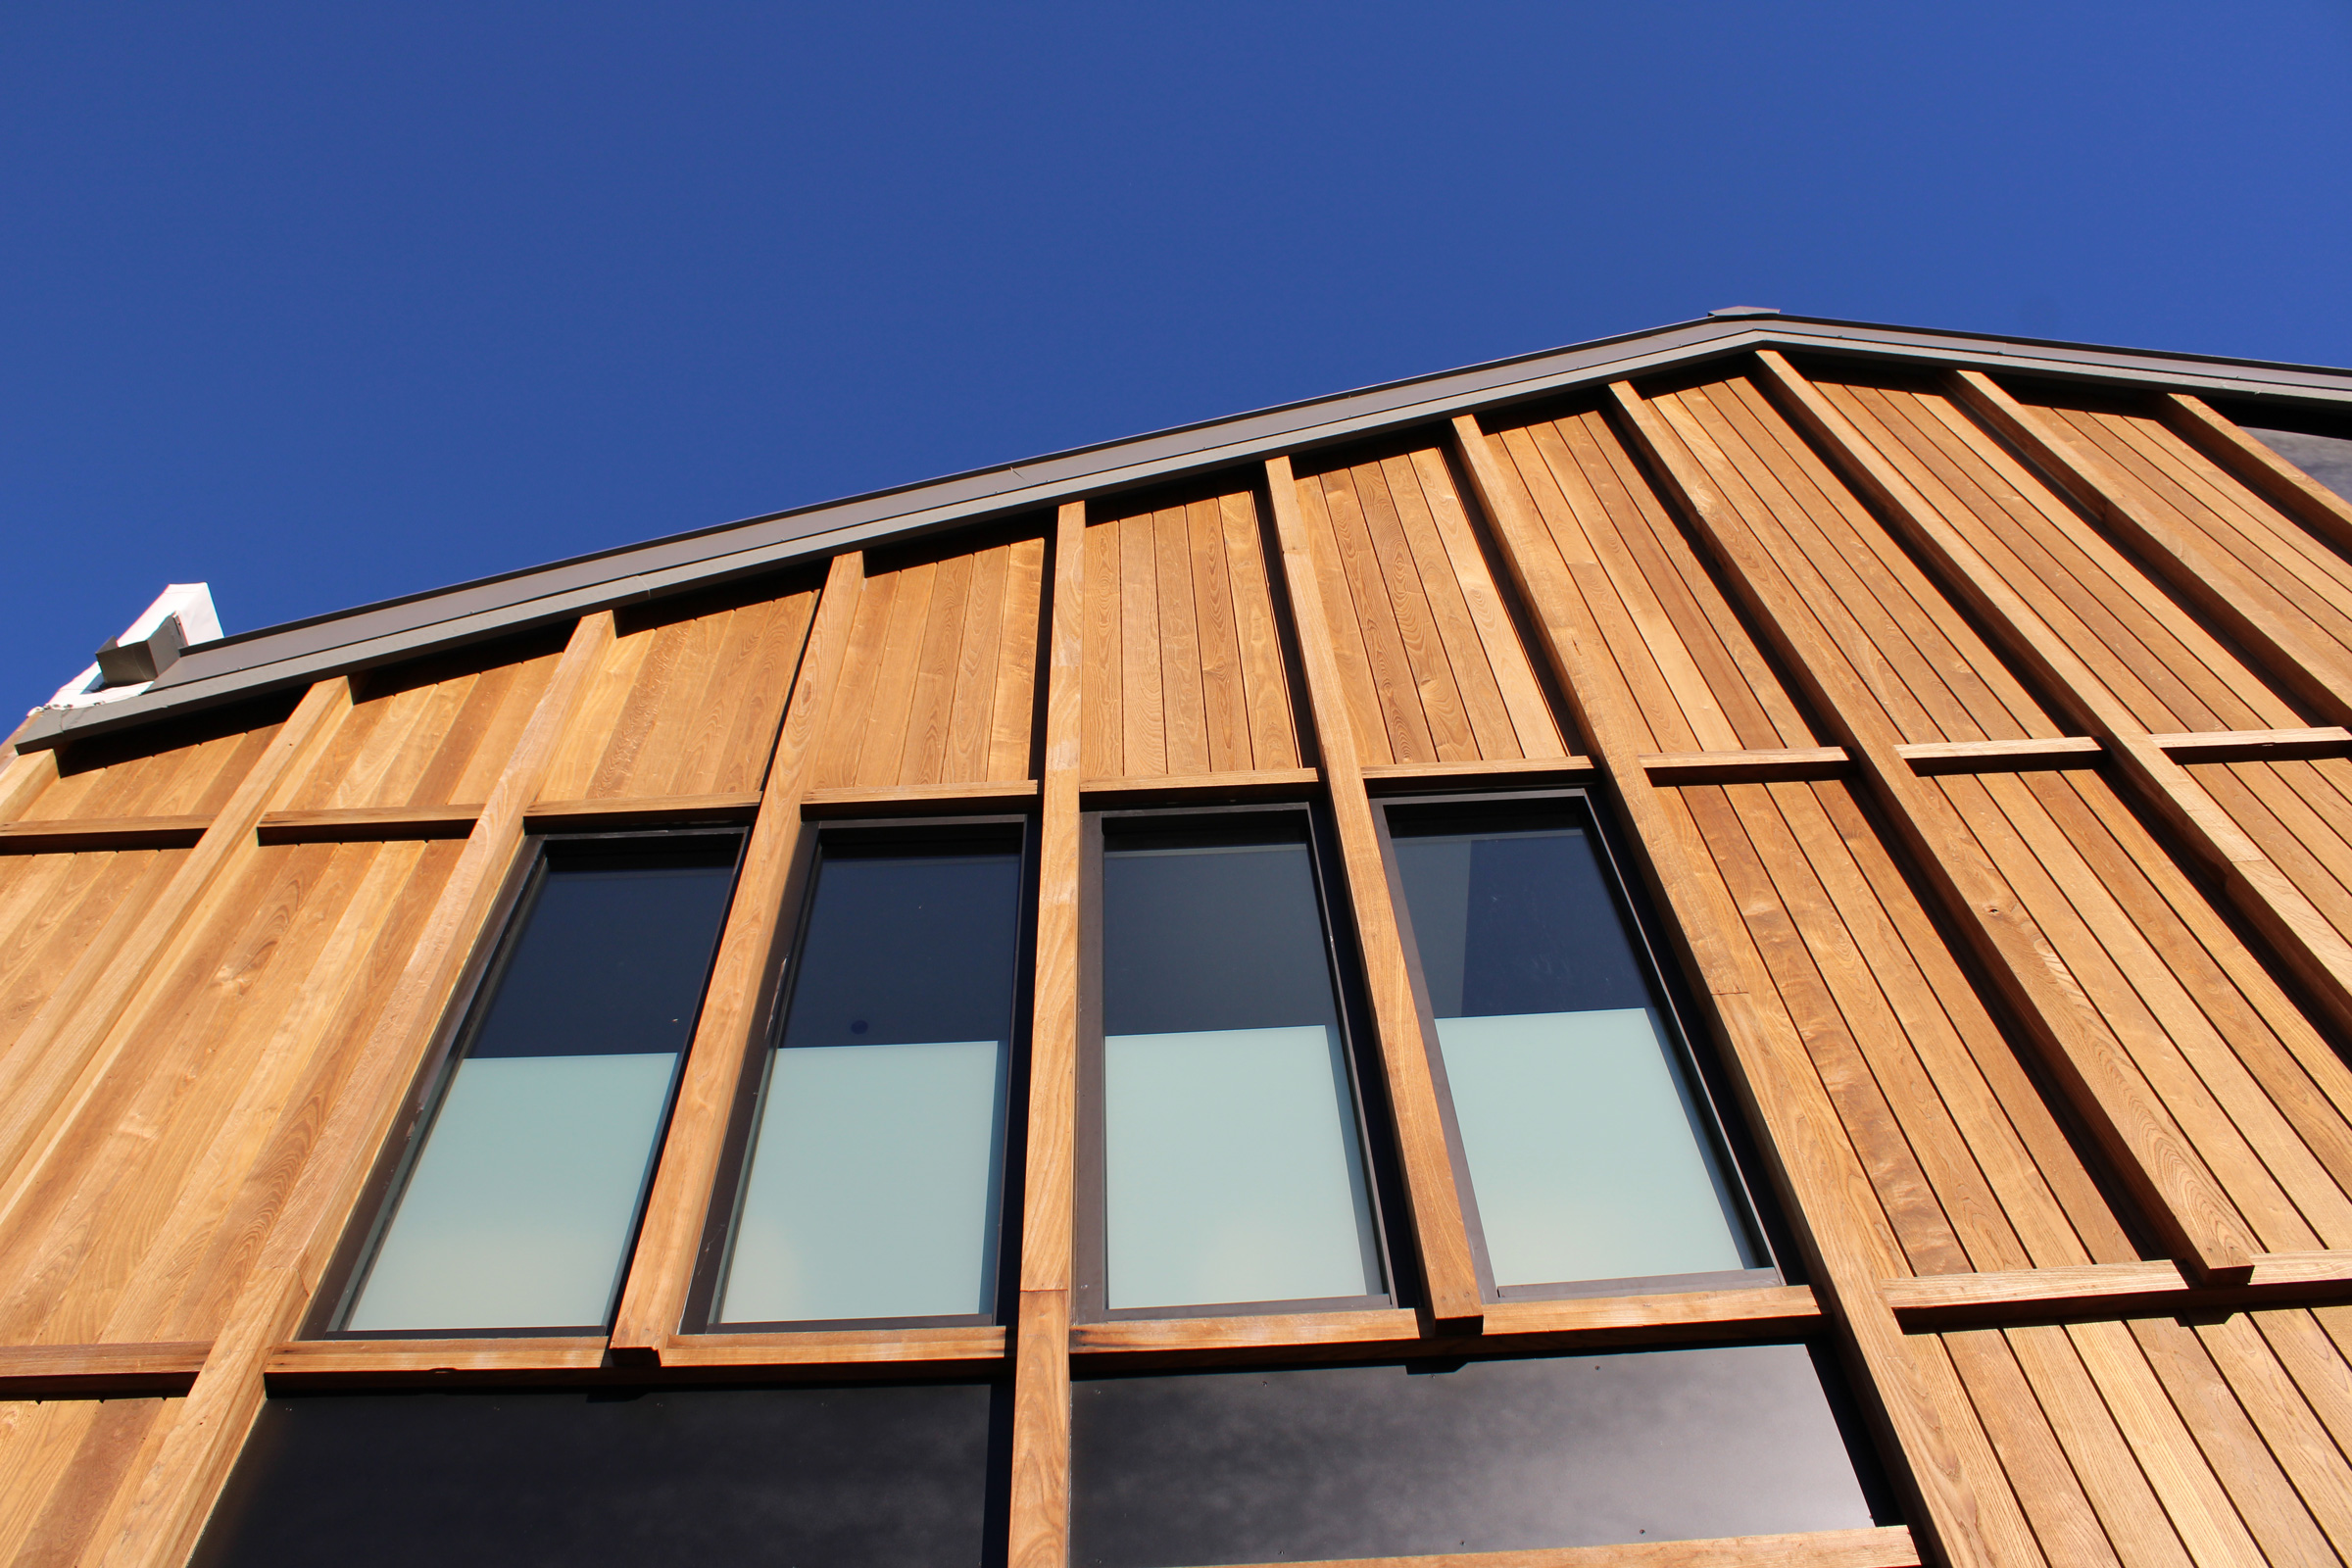 4 Ways ThermoWood Positively Affects the Environment